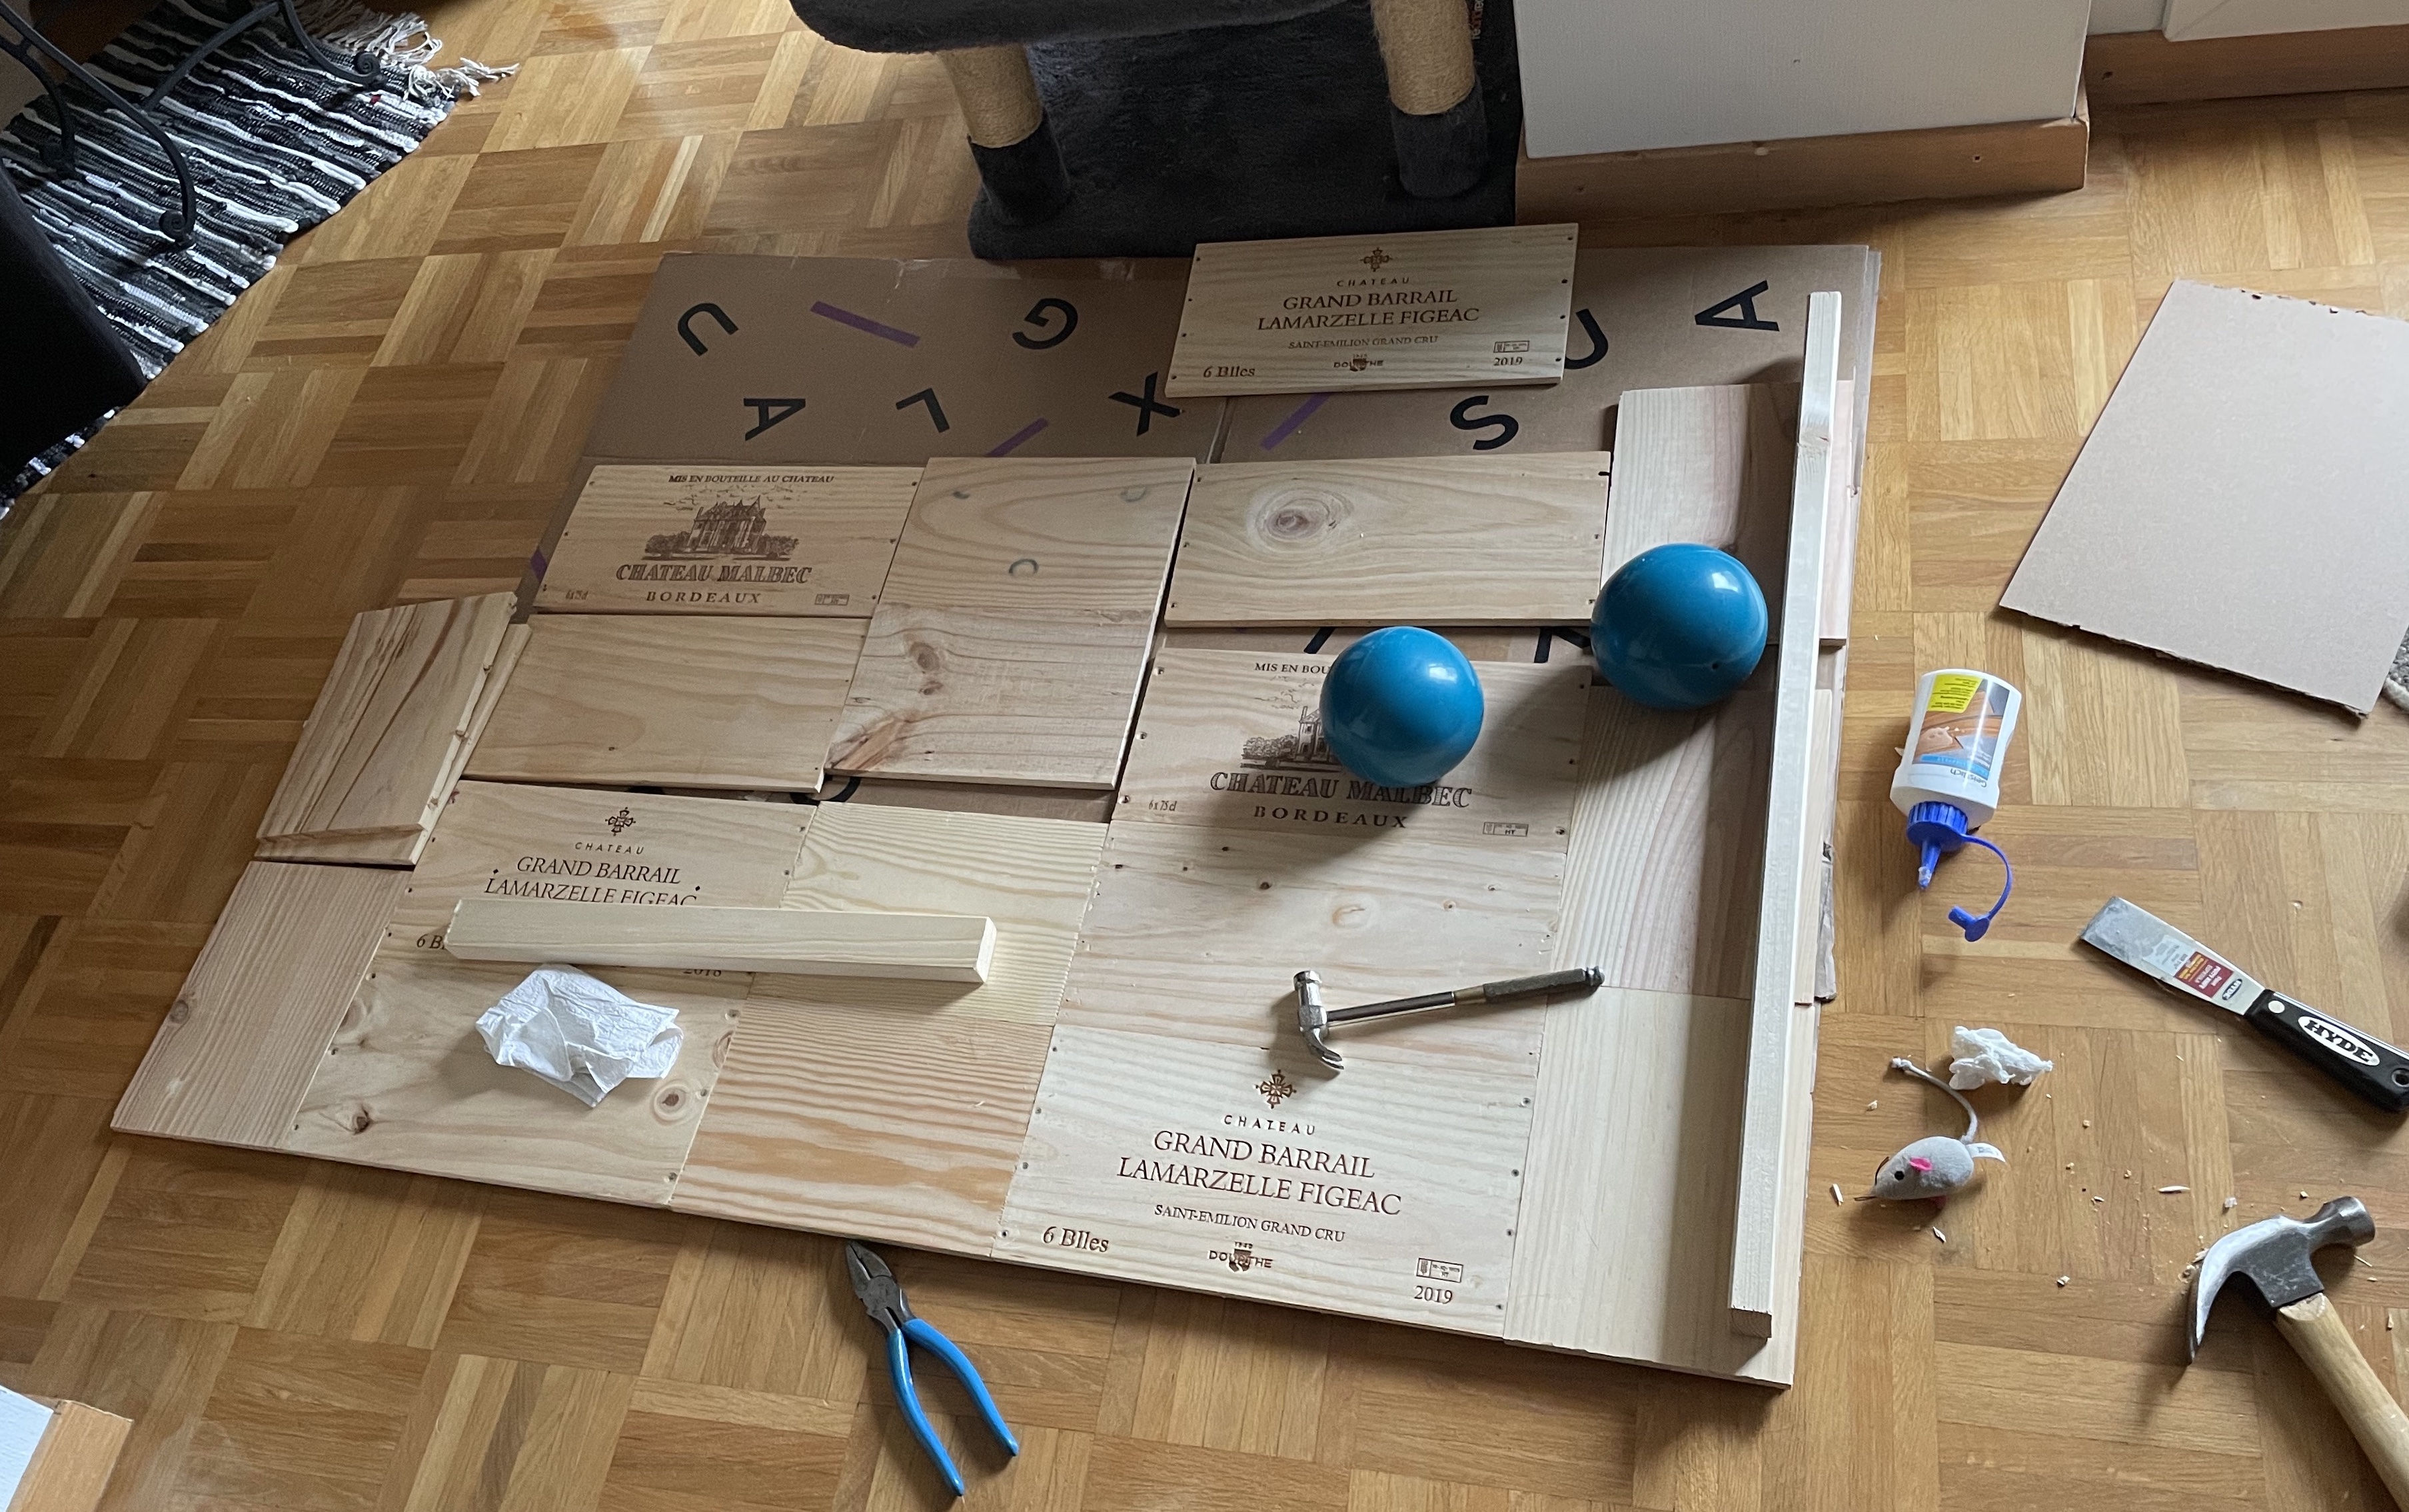 wine crate sides being assembled into desk top